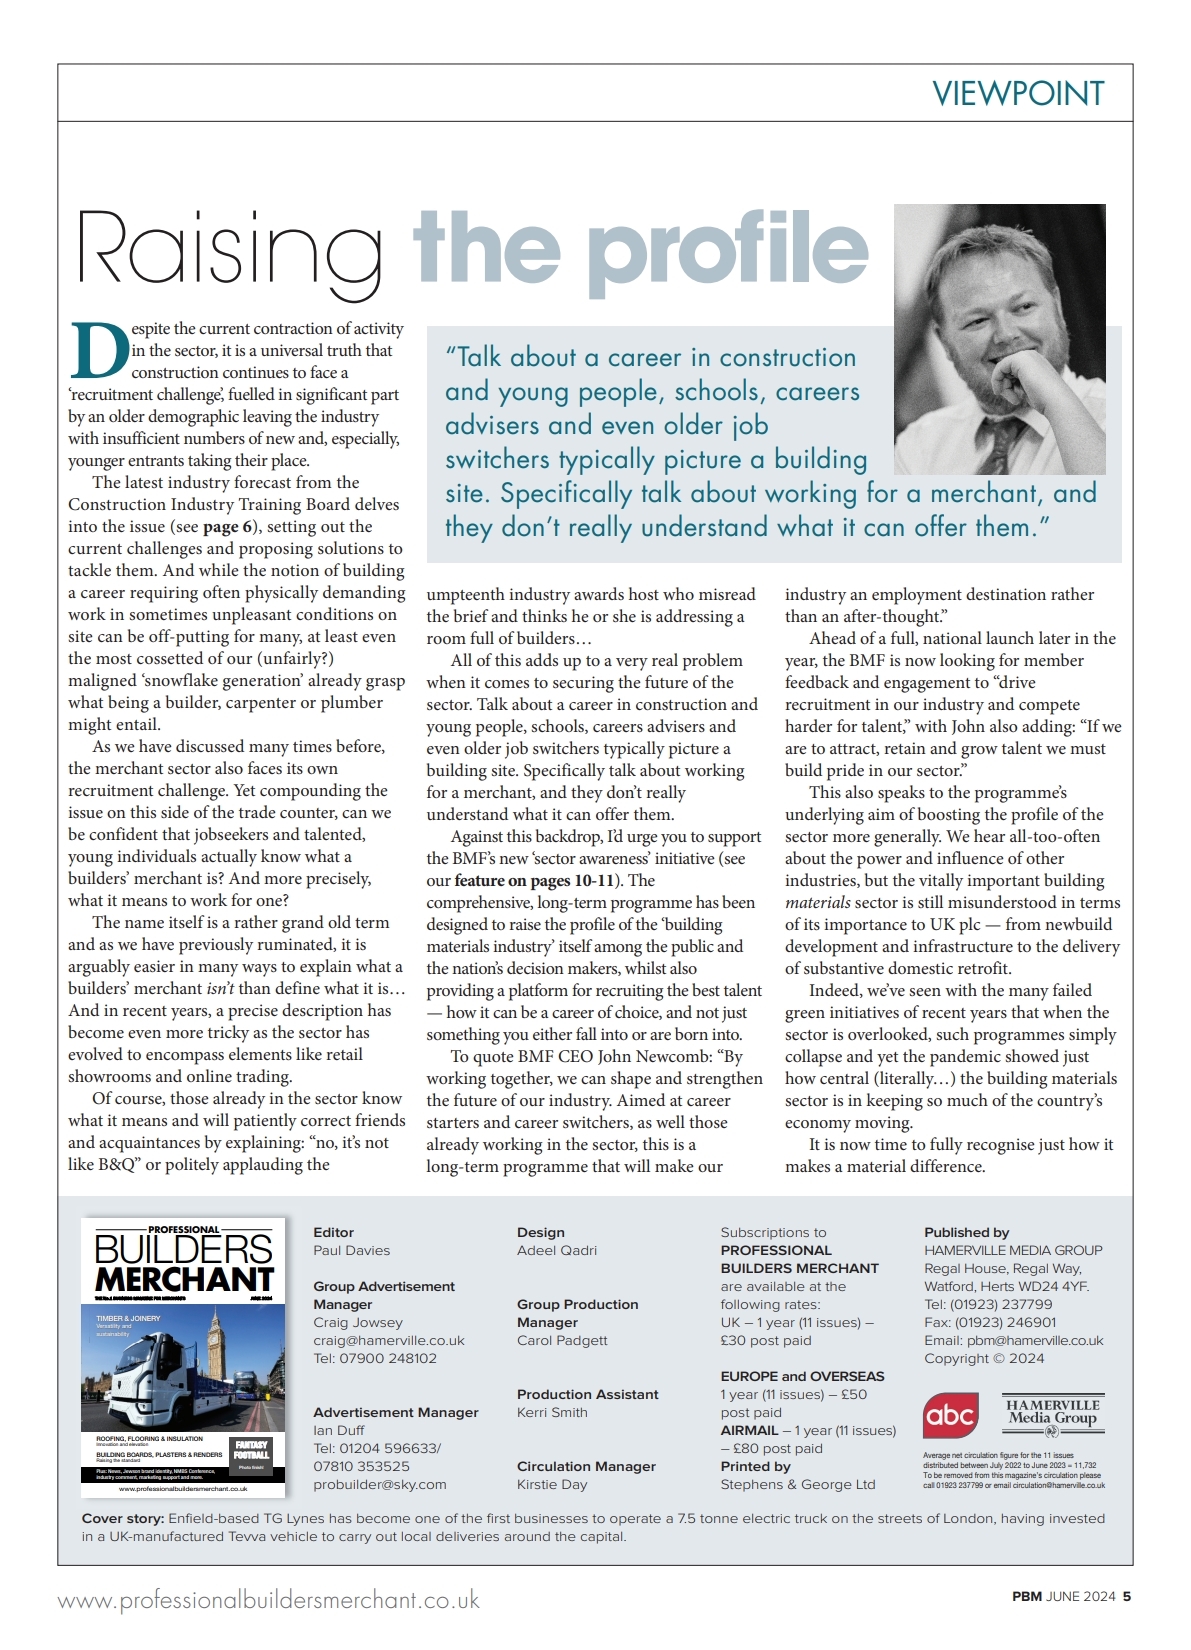 Writing in the June edition of PBM, editor Paul Davies discusses the issue of recruitment into the construction and building materials industry, highlighting a new ‘sector awareness’ initiative being launched by the BMF...